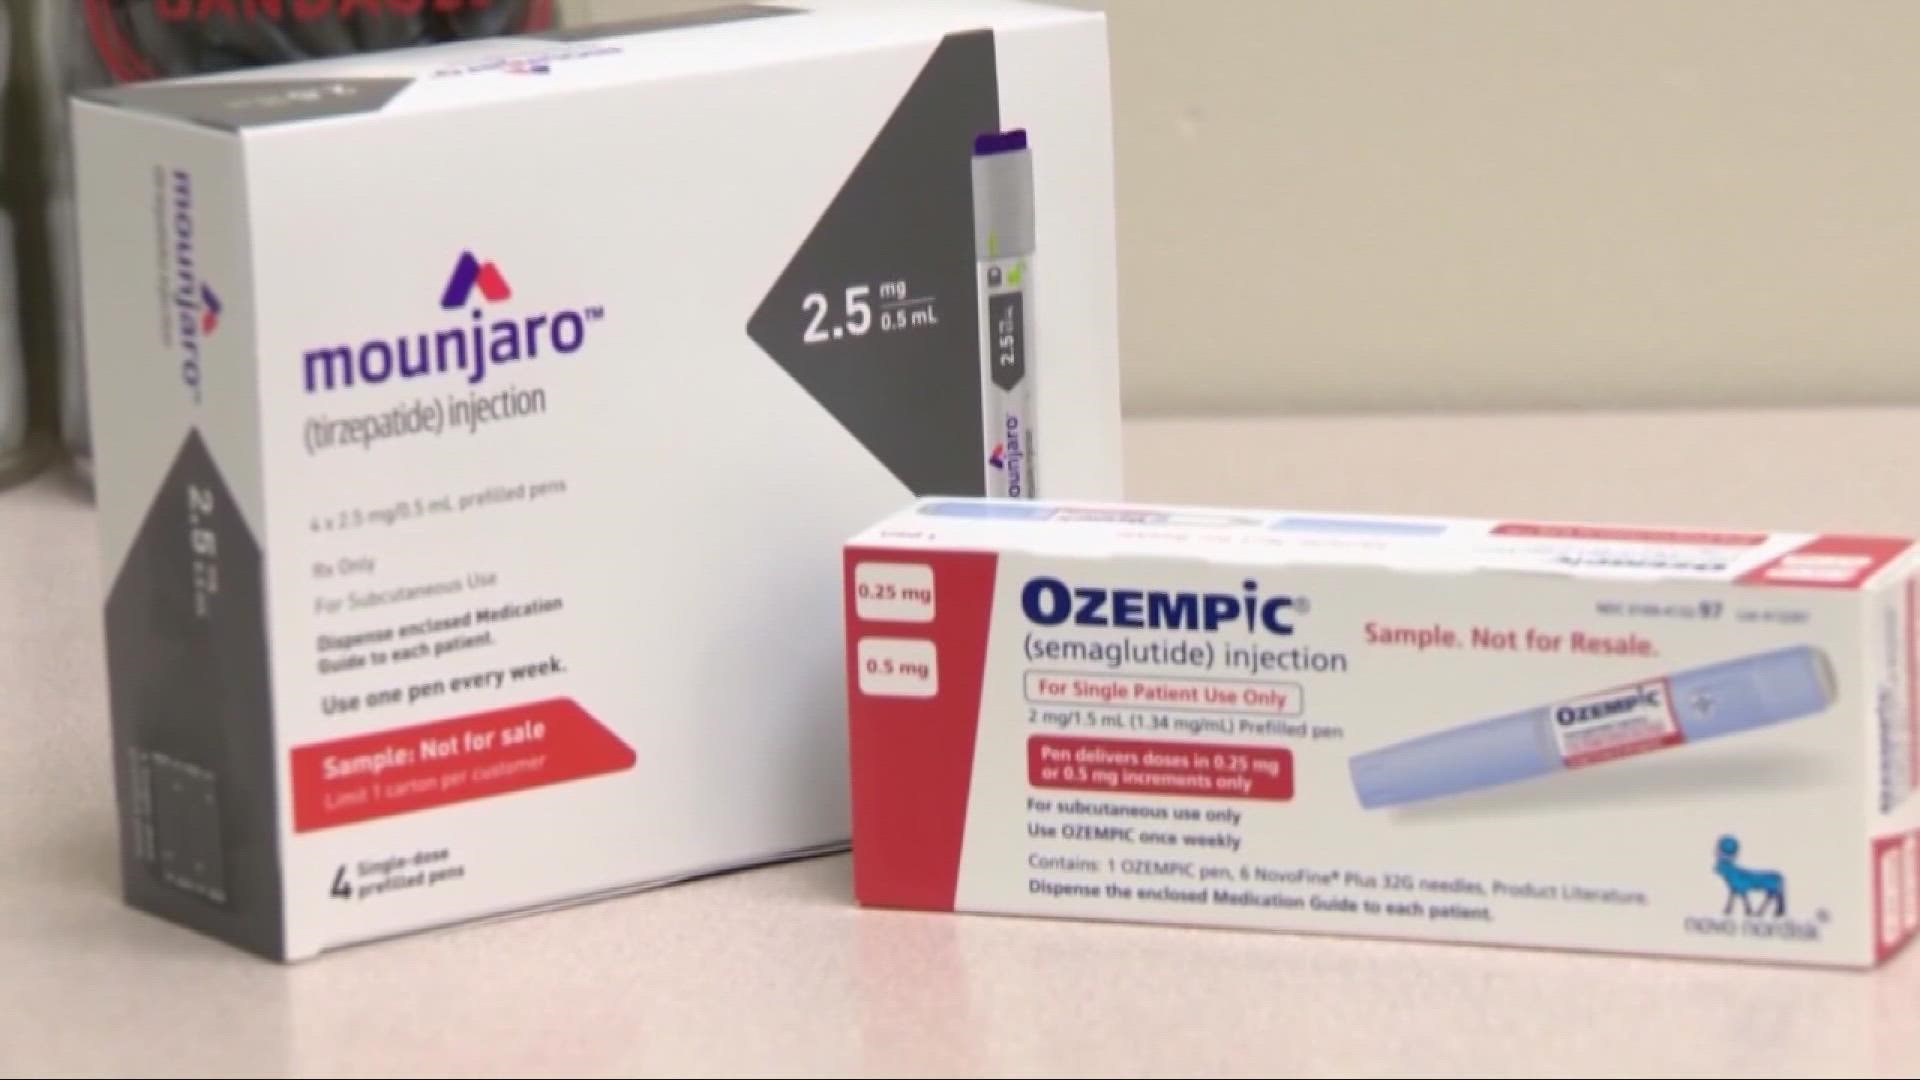 Fresenius Medical: effect of drugs like Ozempic on patient numbers is  neutral